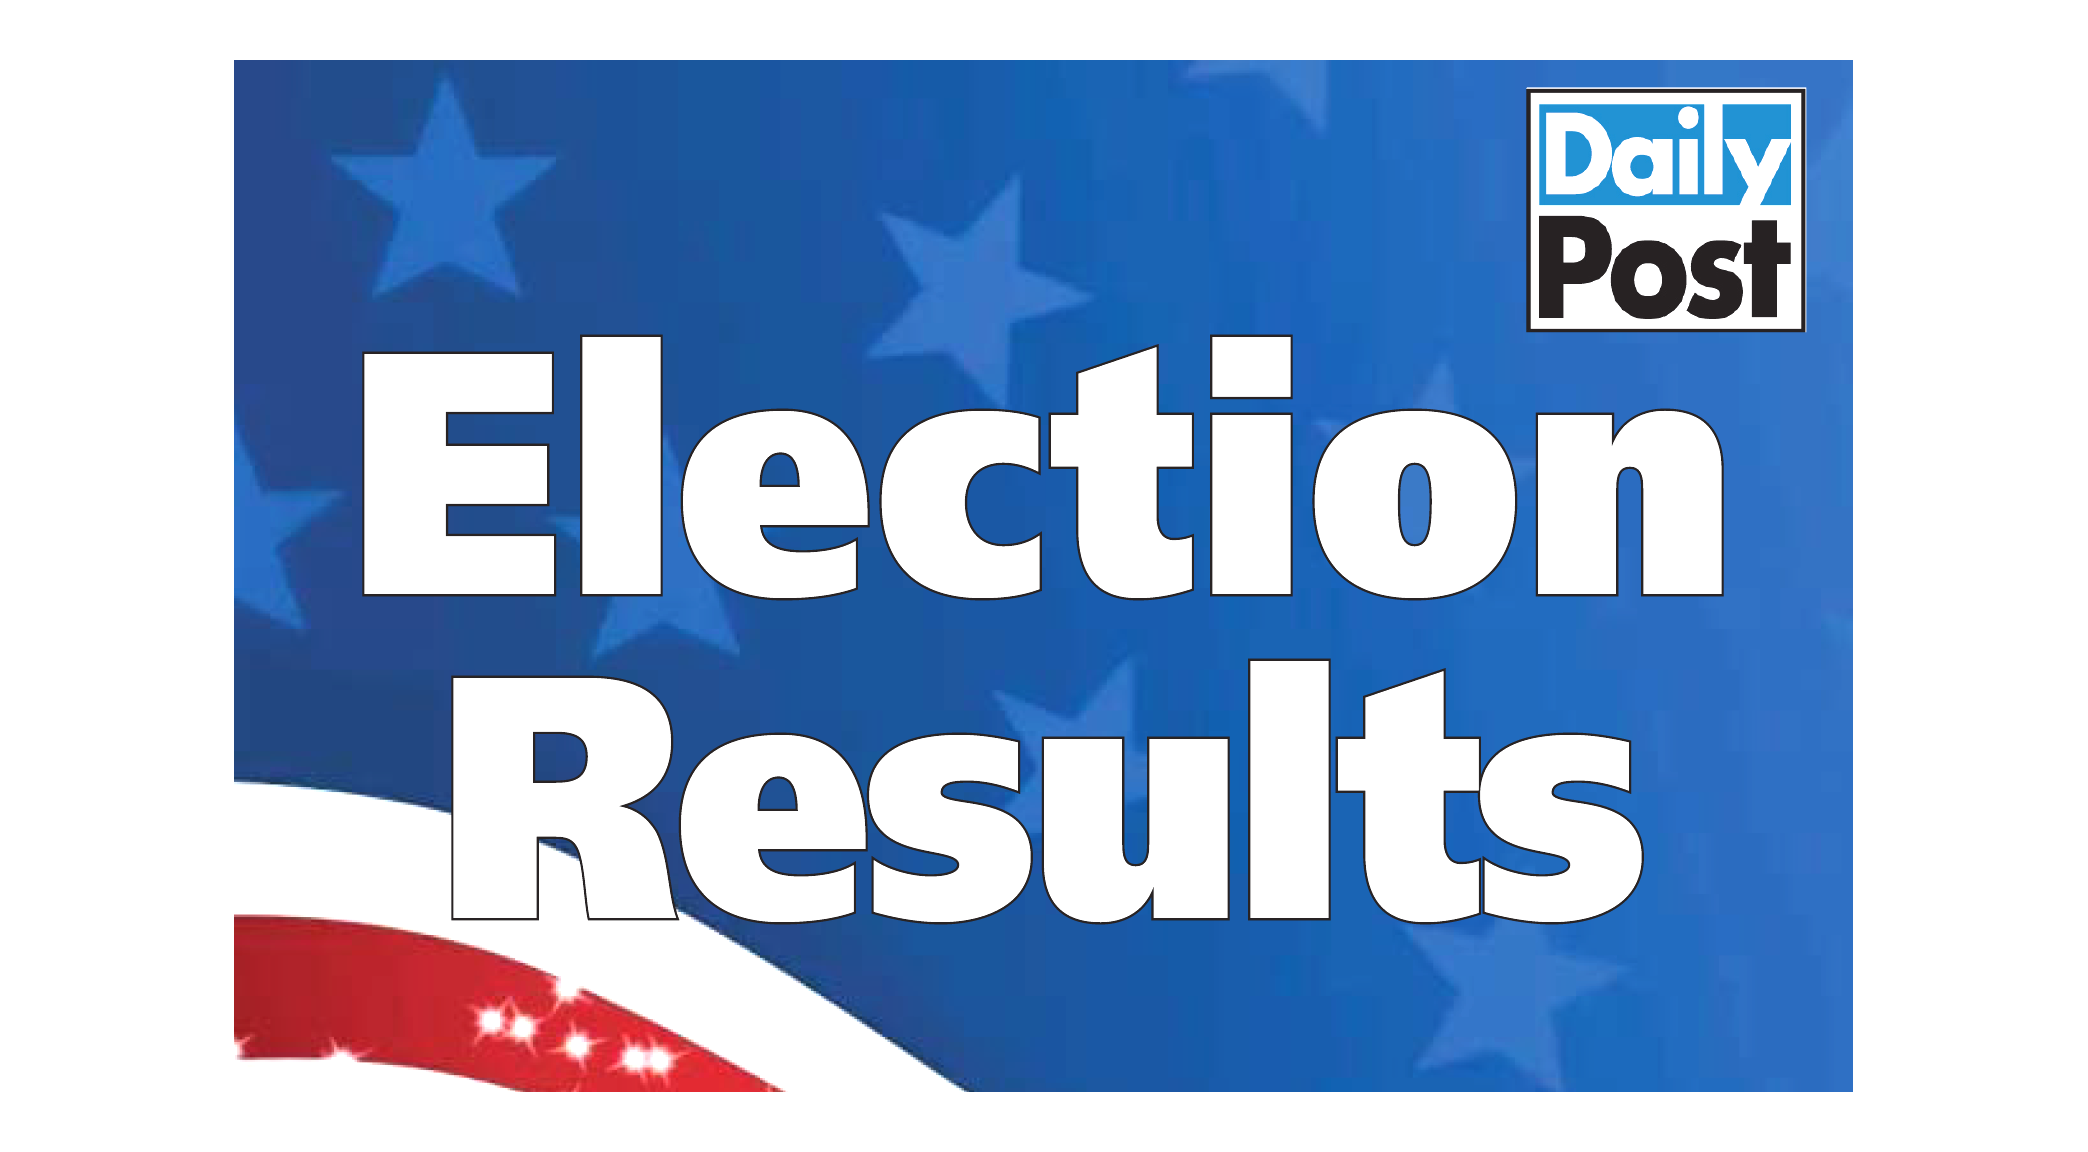 Election results